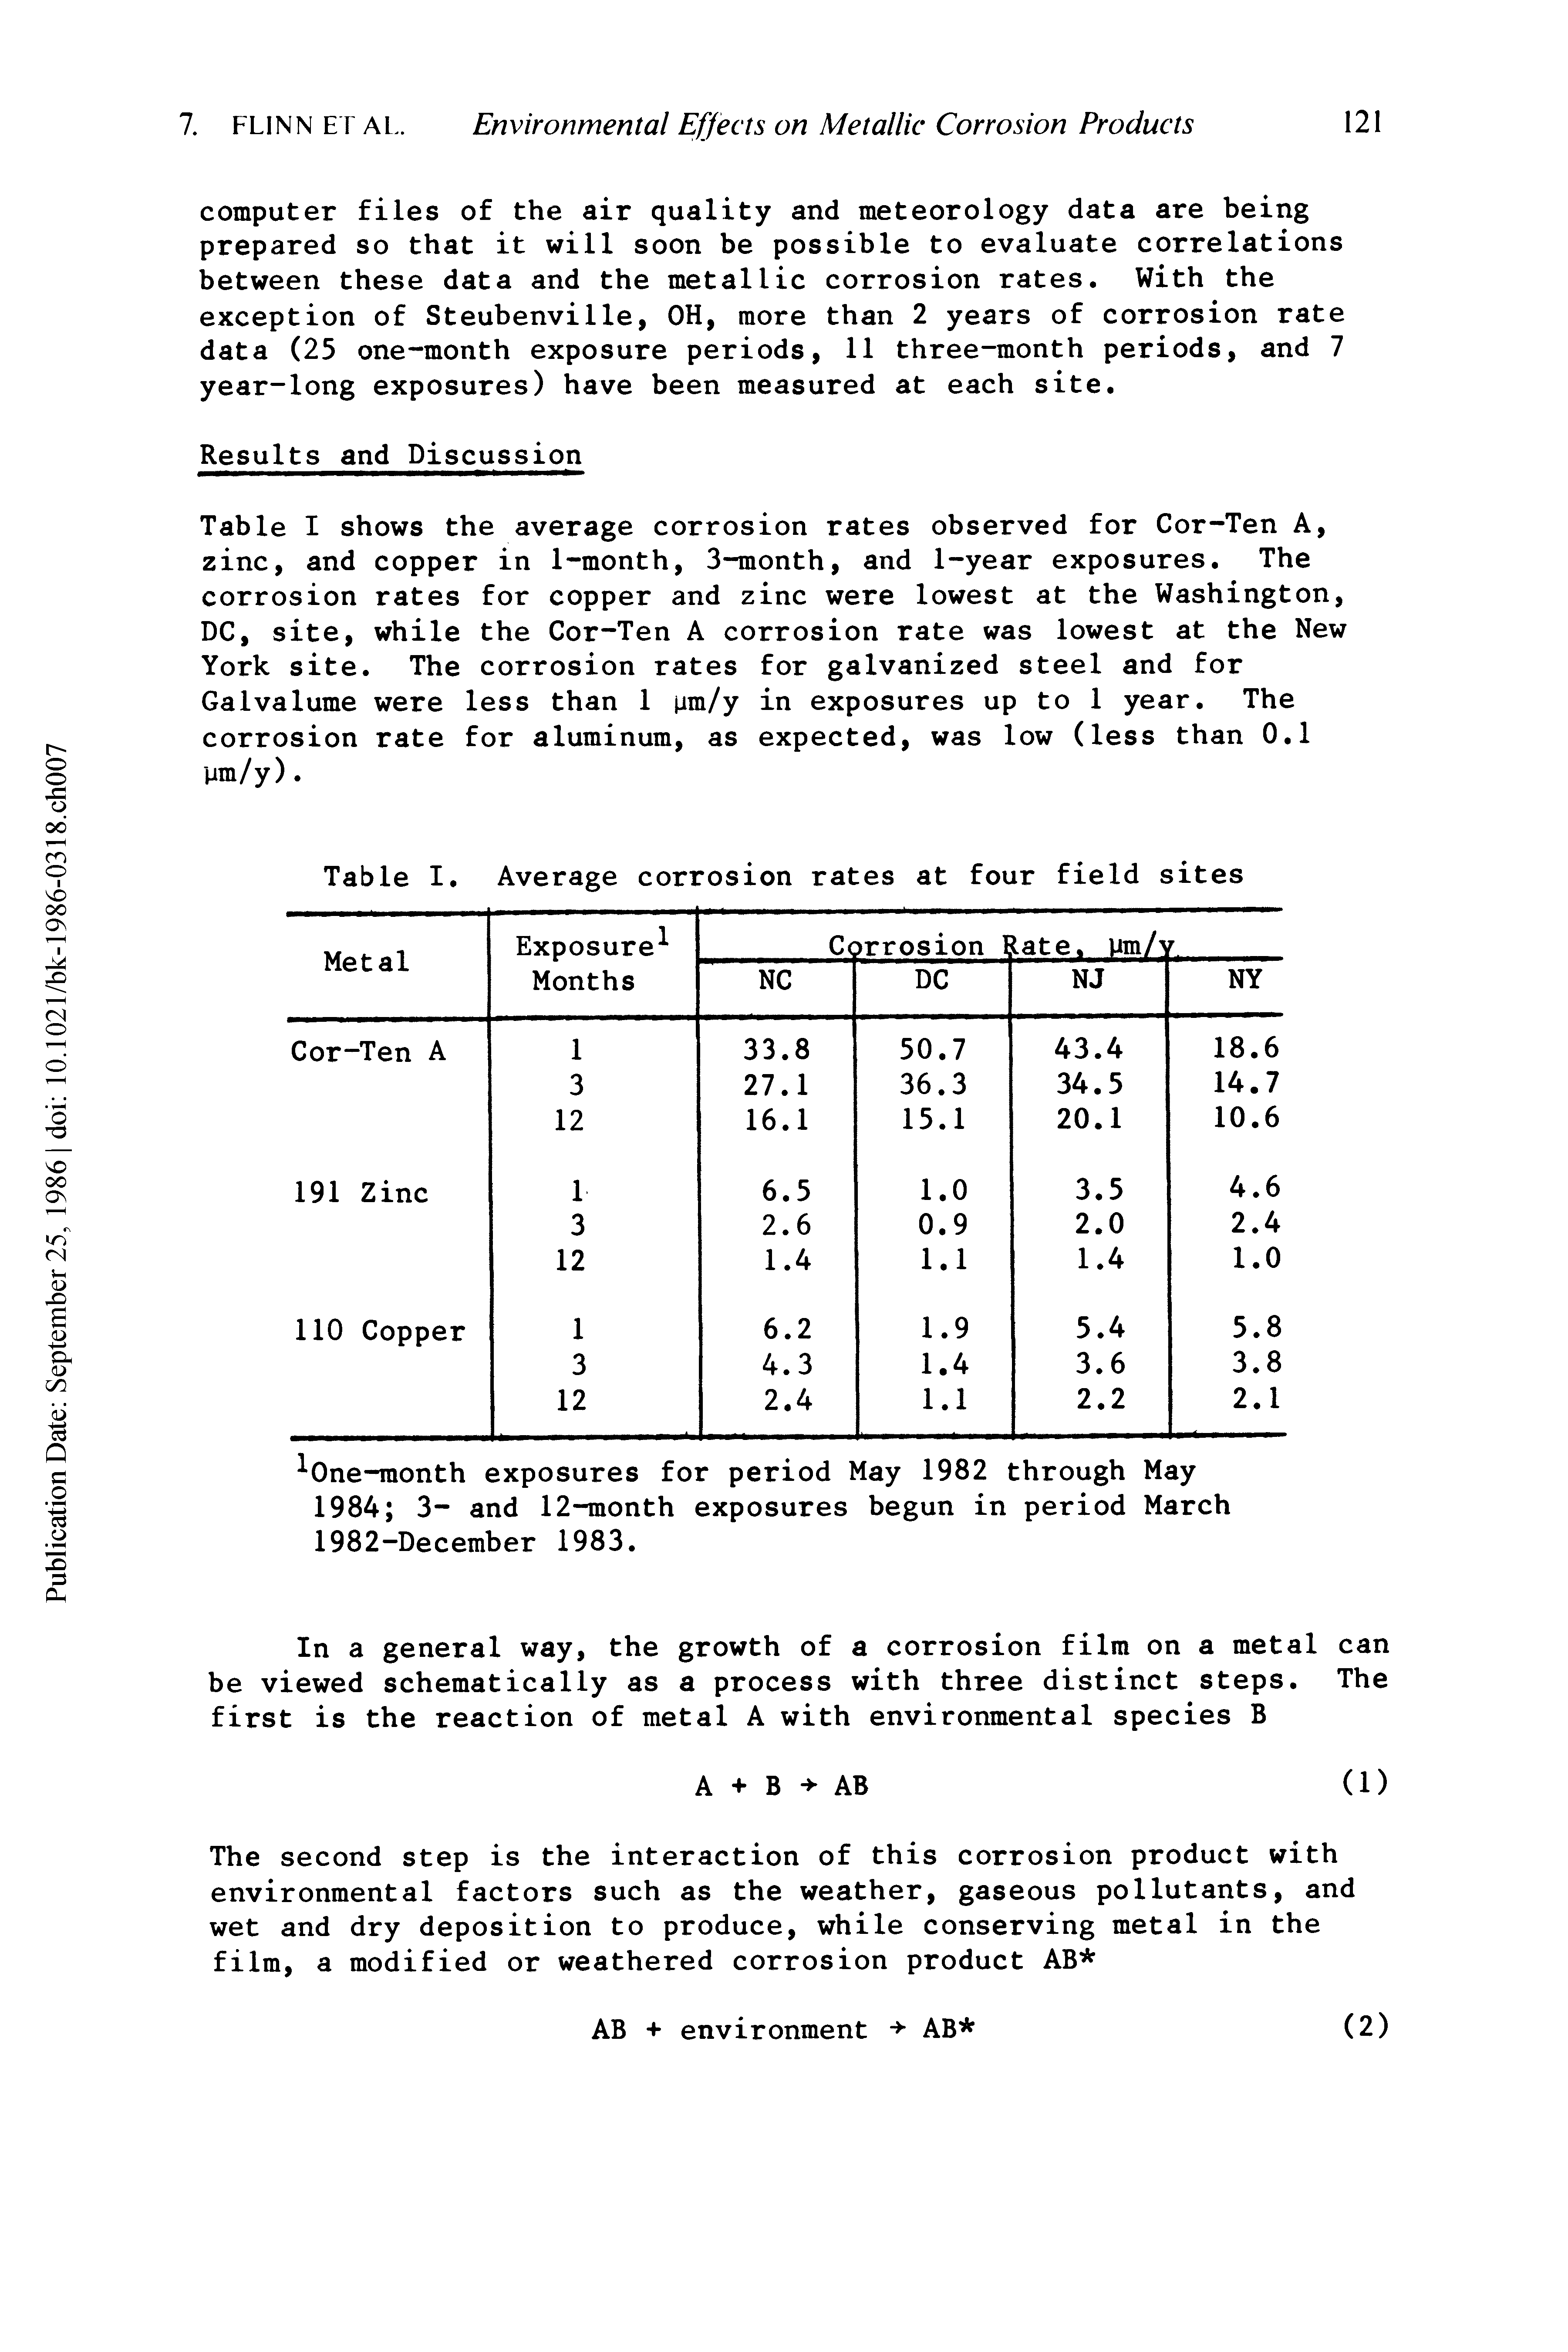 Table I shows the average corrosion rates observed for Cor-Ten A, zinc, and copper in 1-month, 3-month, and 1-year exposures. The corrosion rates for copper and zinc were lowest at the Washington, DC, site, while the Cor-Ten A corrosion rate was lowest at the New York site. The corrosion rates for galvanized steel and for Galvalume were less than 1 m/y in exposures up to 1 year. The corrosion rate for aluminum, as expected, was low (less than 0.1 ym/y).